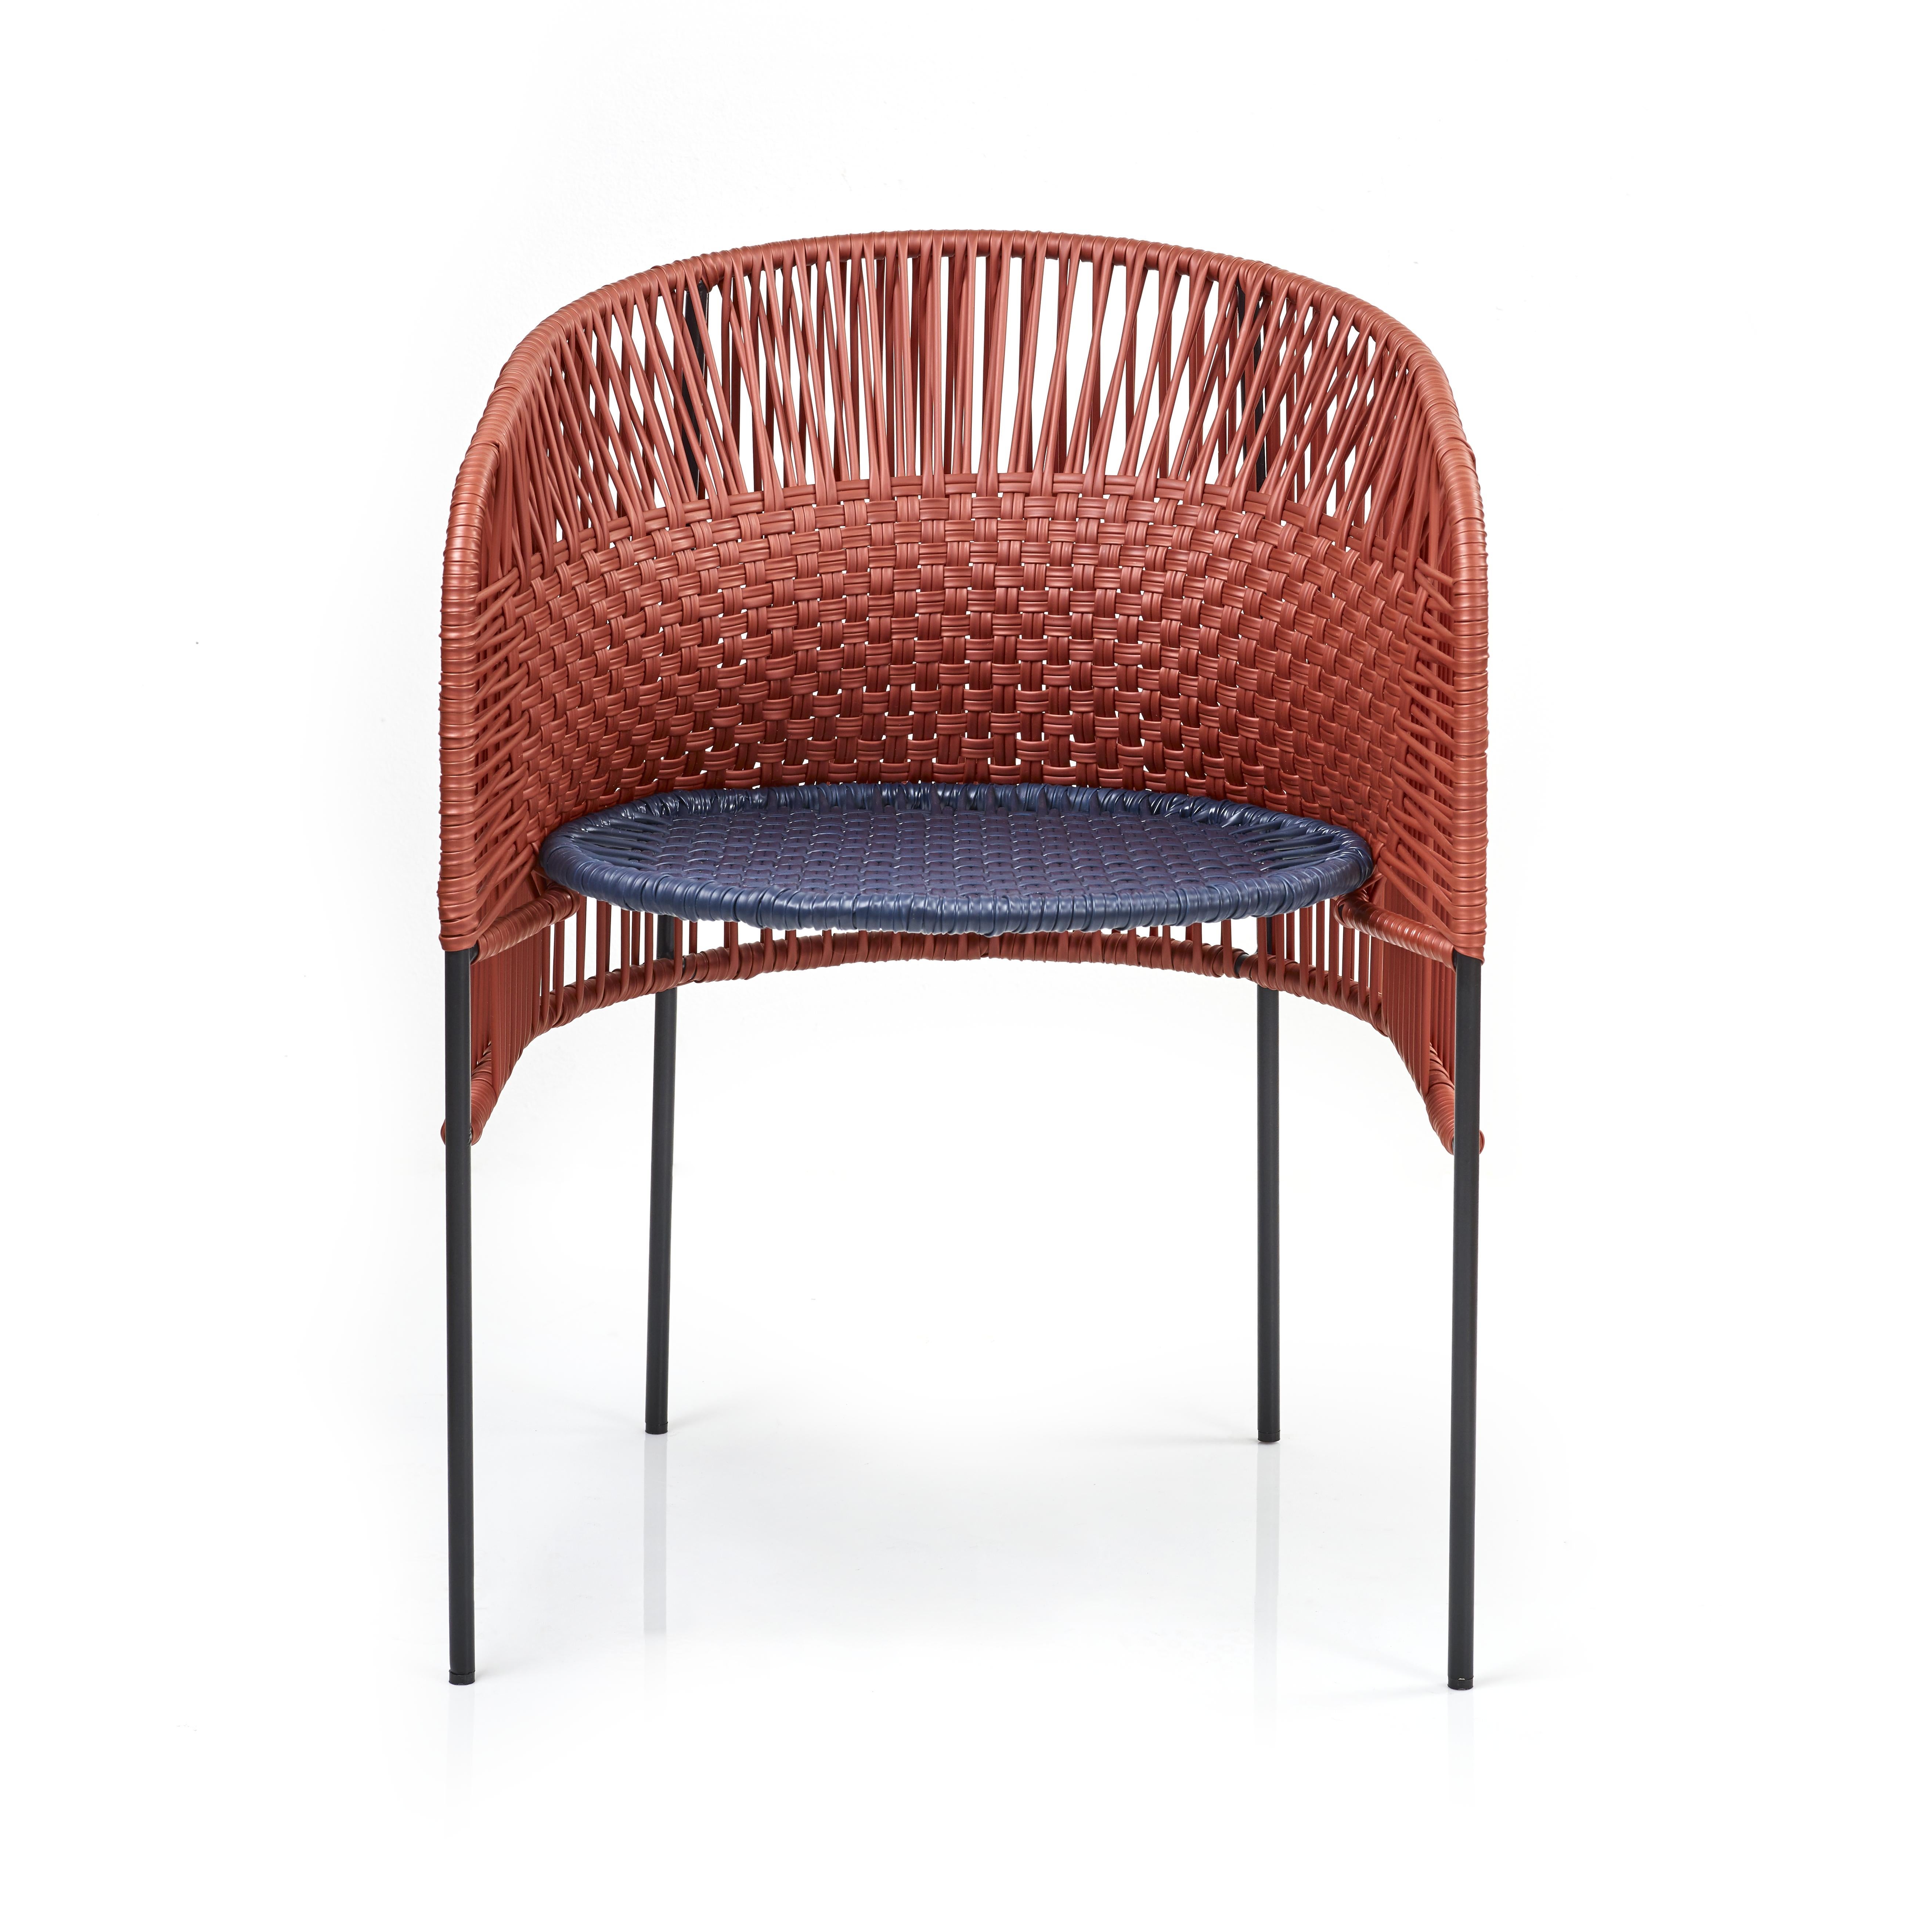 Set of 2 orange Caribe chic dining chair by Sebastian Herkner.
Materials: galvanized and powder-coated tubular steel. PVC strings are made from recycled plastic.
Technique: made from recycled plastic and weaved by local craftspeople in Colombia.